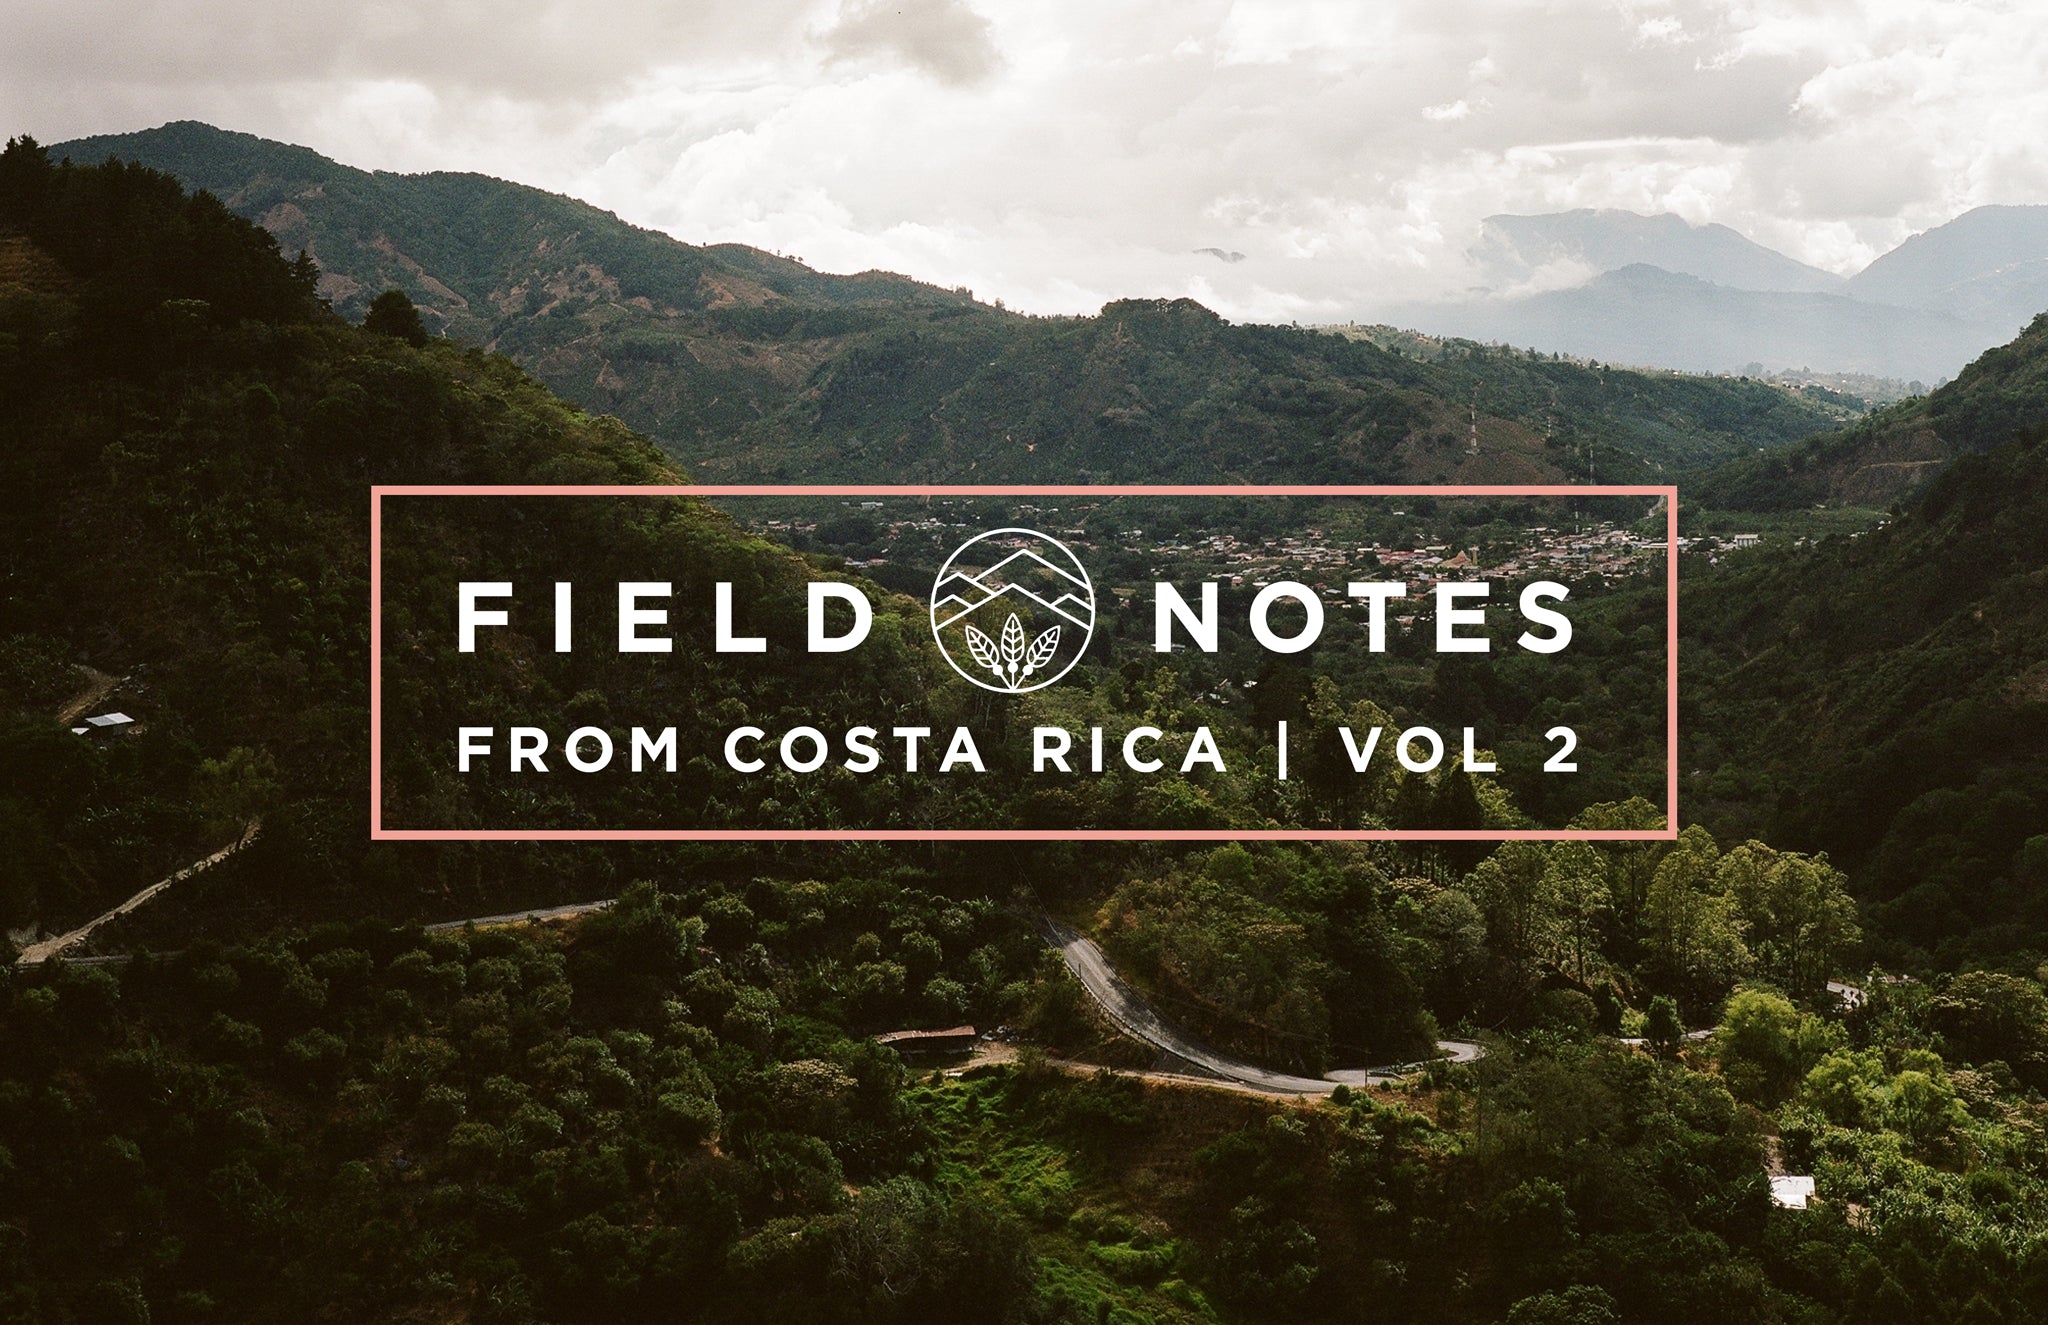 Field Notes from Costa Rica Vol. 2